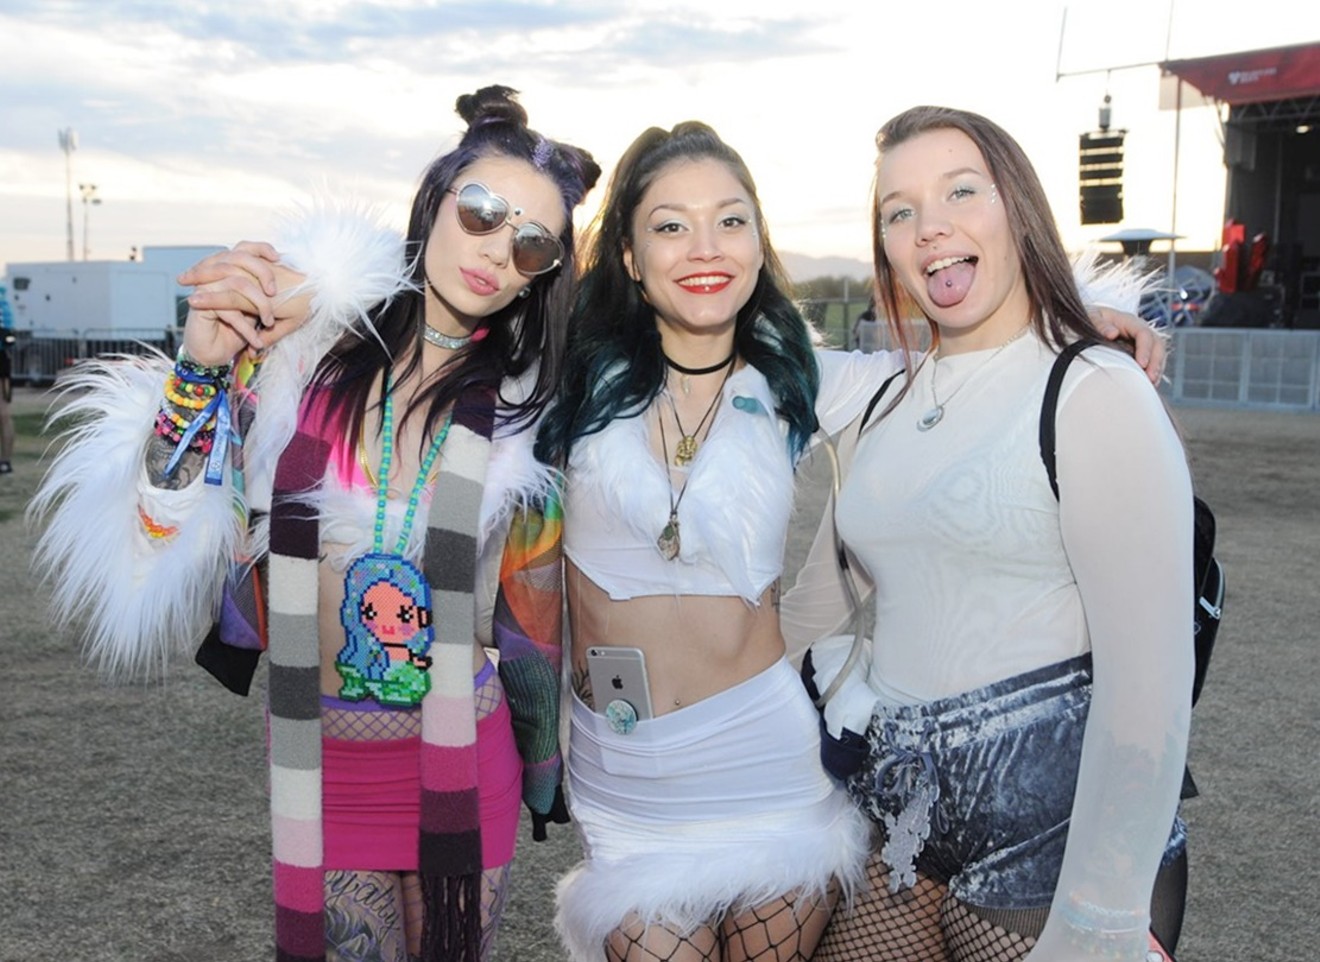 Get ready to rage, EDM fans – the last festival of the decade is upon us.